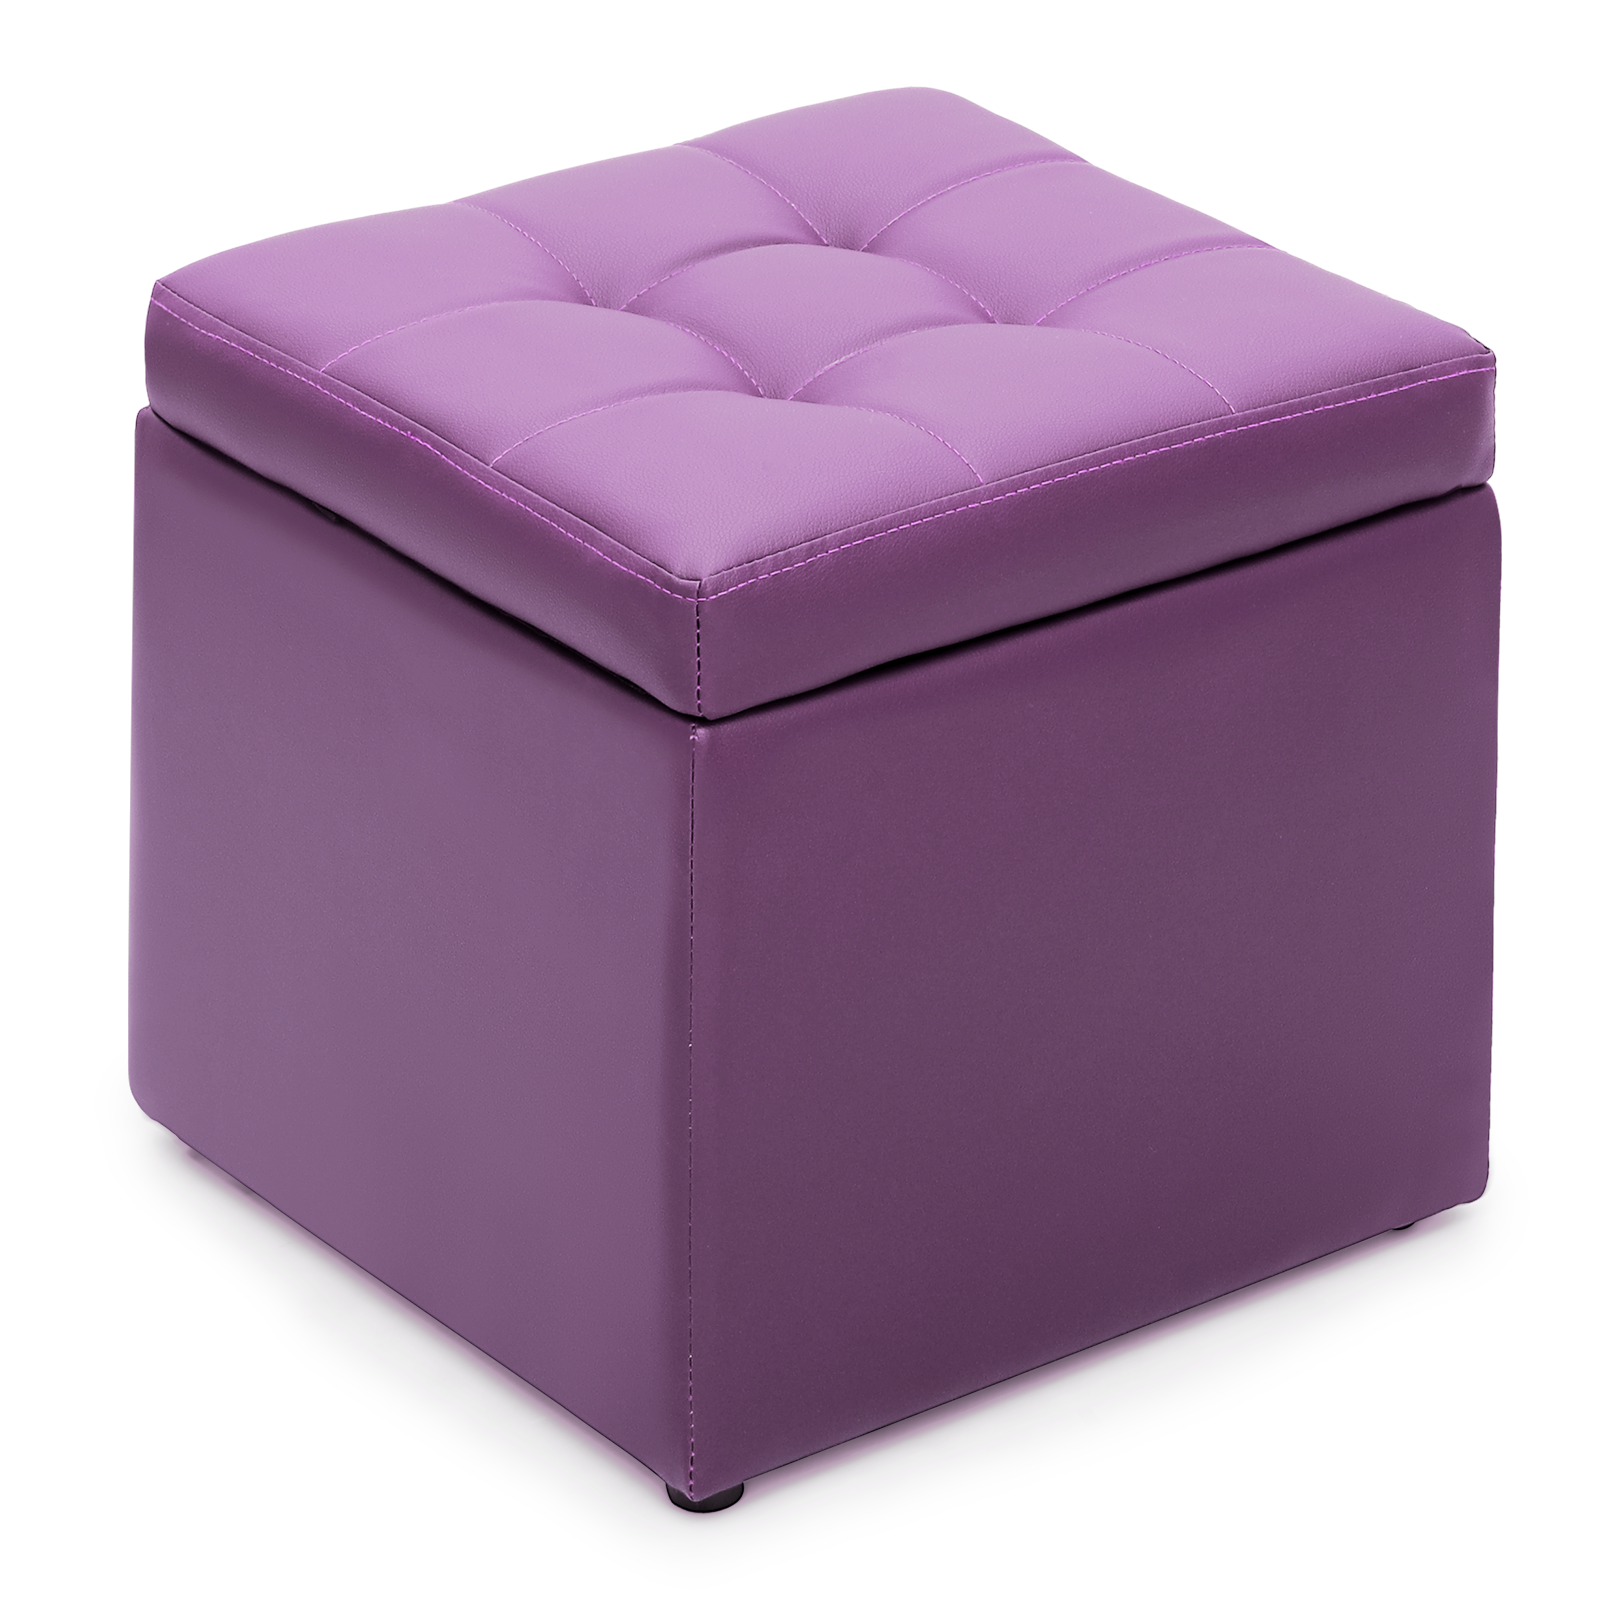 MoNiBloom 16" Square Button Tufted Storage Ottoman, PU Leather Entryway Shoe Bench, Livingroom Lift Top Pouffe Storage Cube Footstool, Purple - image 1 of 9